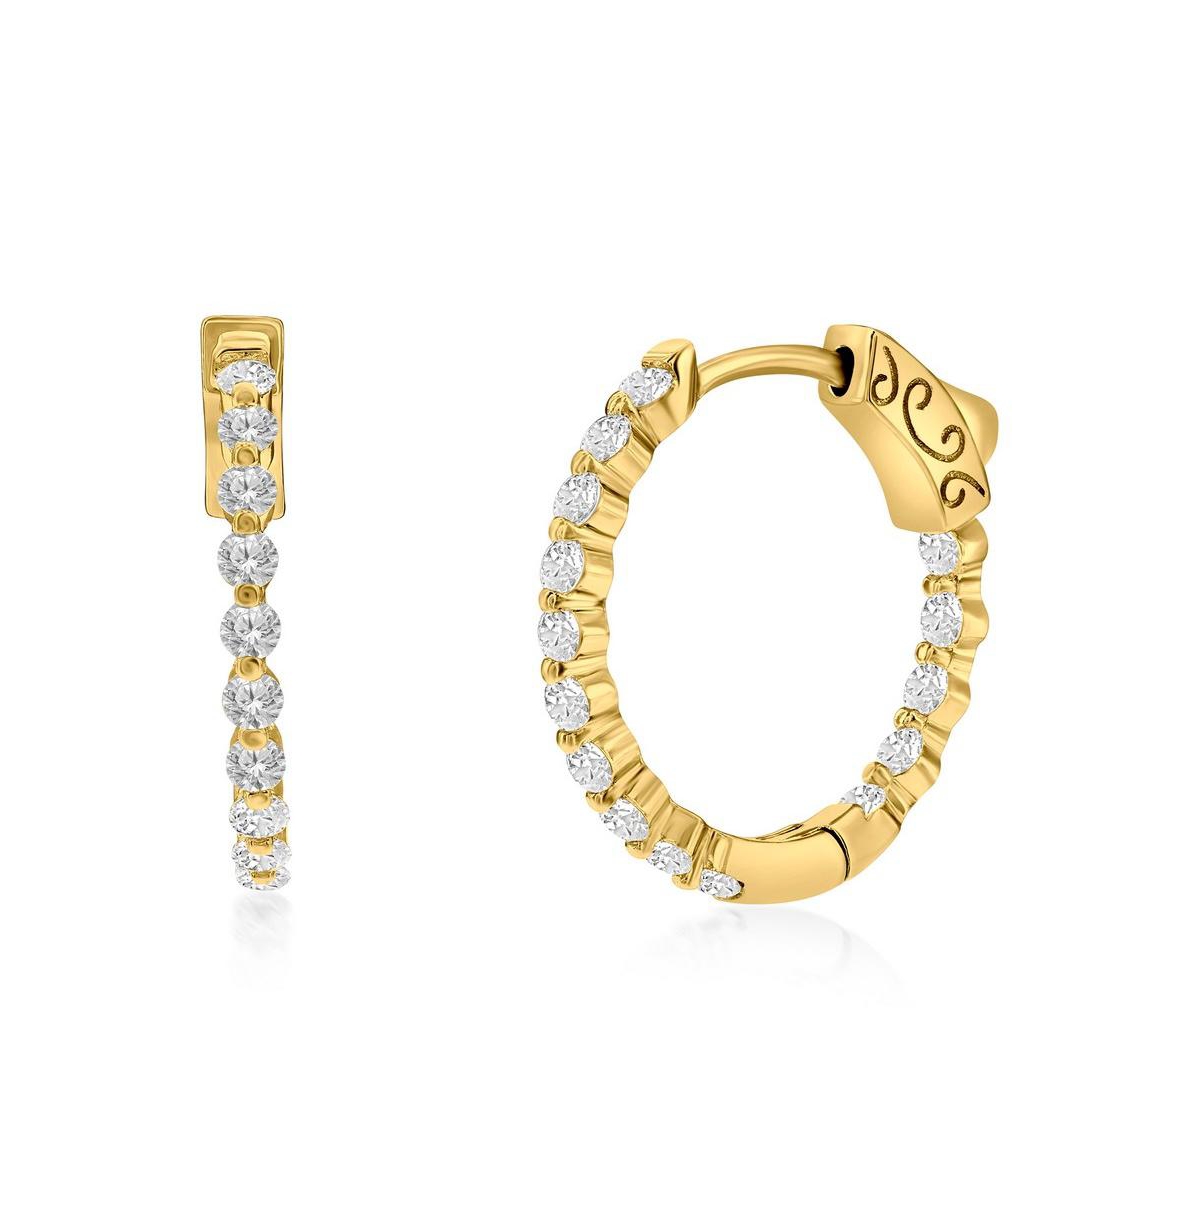 Sterling Silver or Gold Plated Over Sterling Silver 20mm Inside-Outside Round Cz Hoop Earrings - Gold